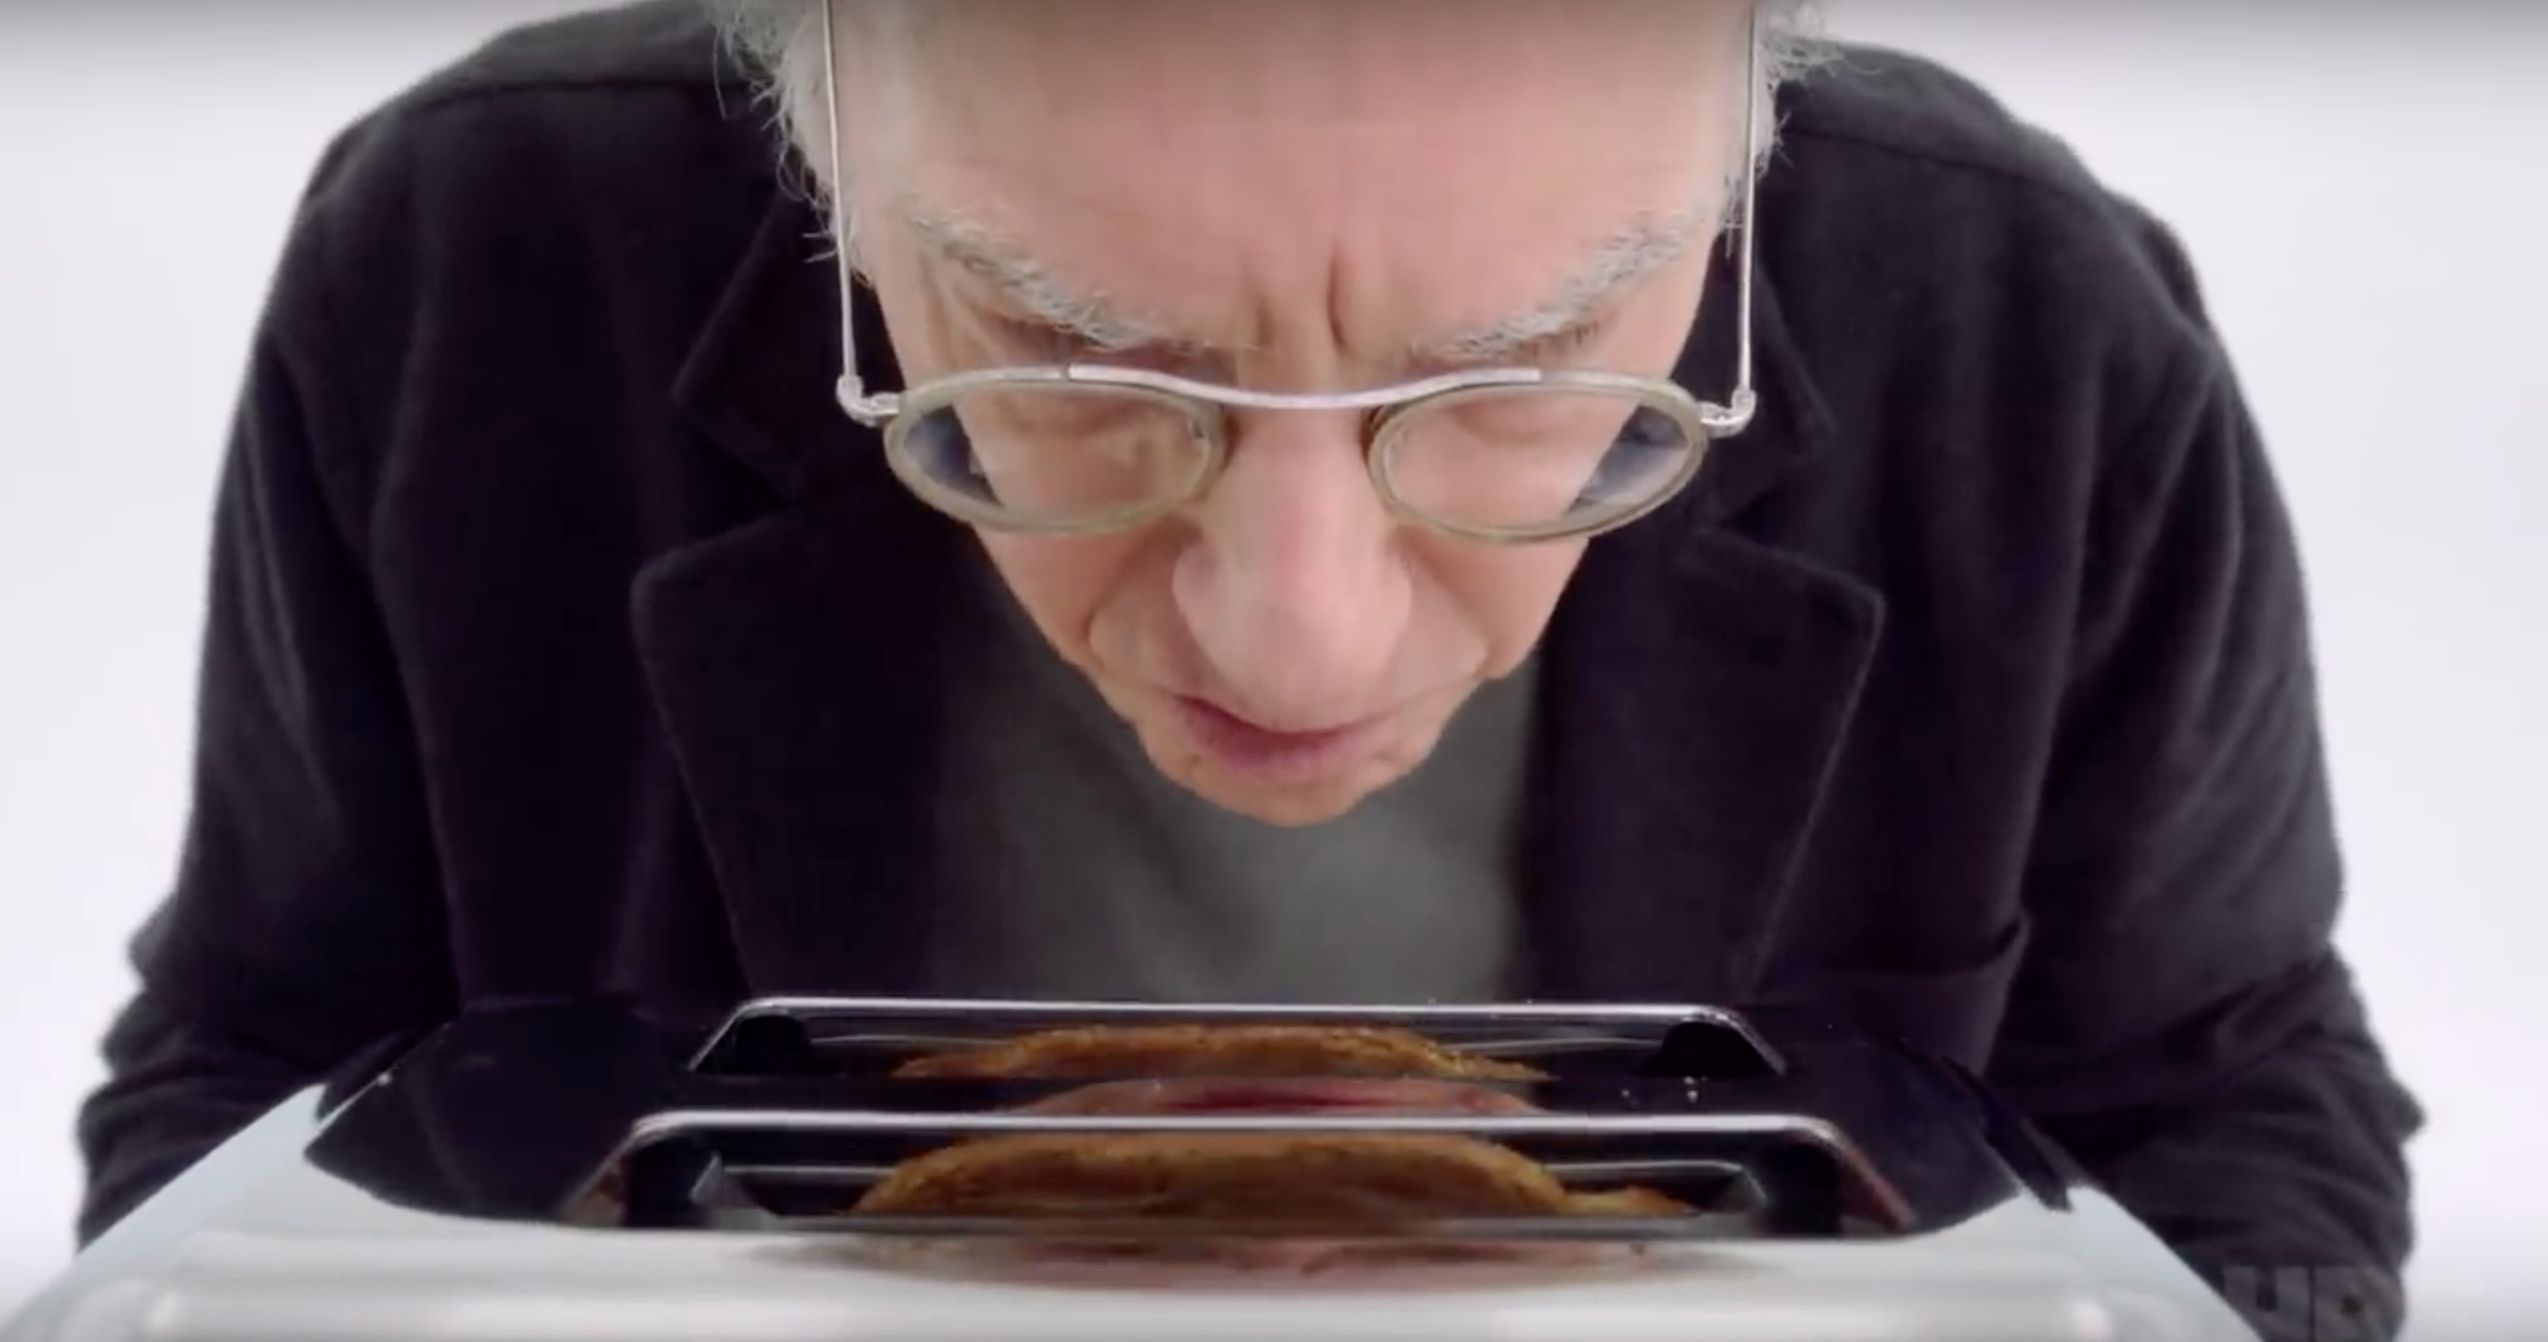 Curb Your Enthusiasm Season 10 Teaser Arrives, New Episodes Coming in January